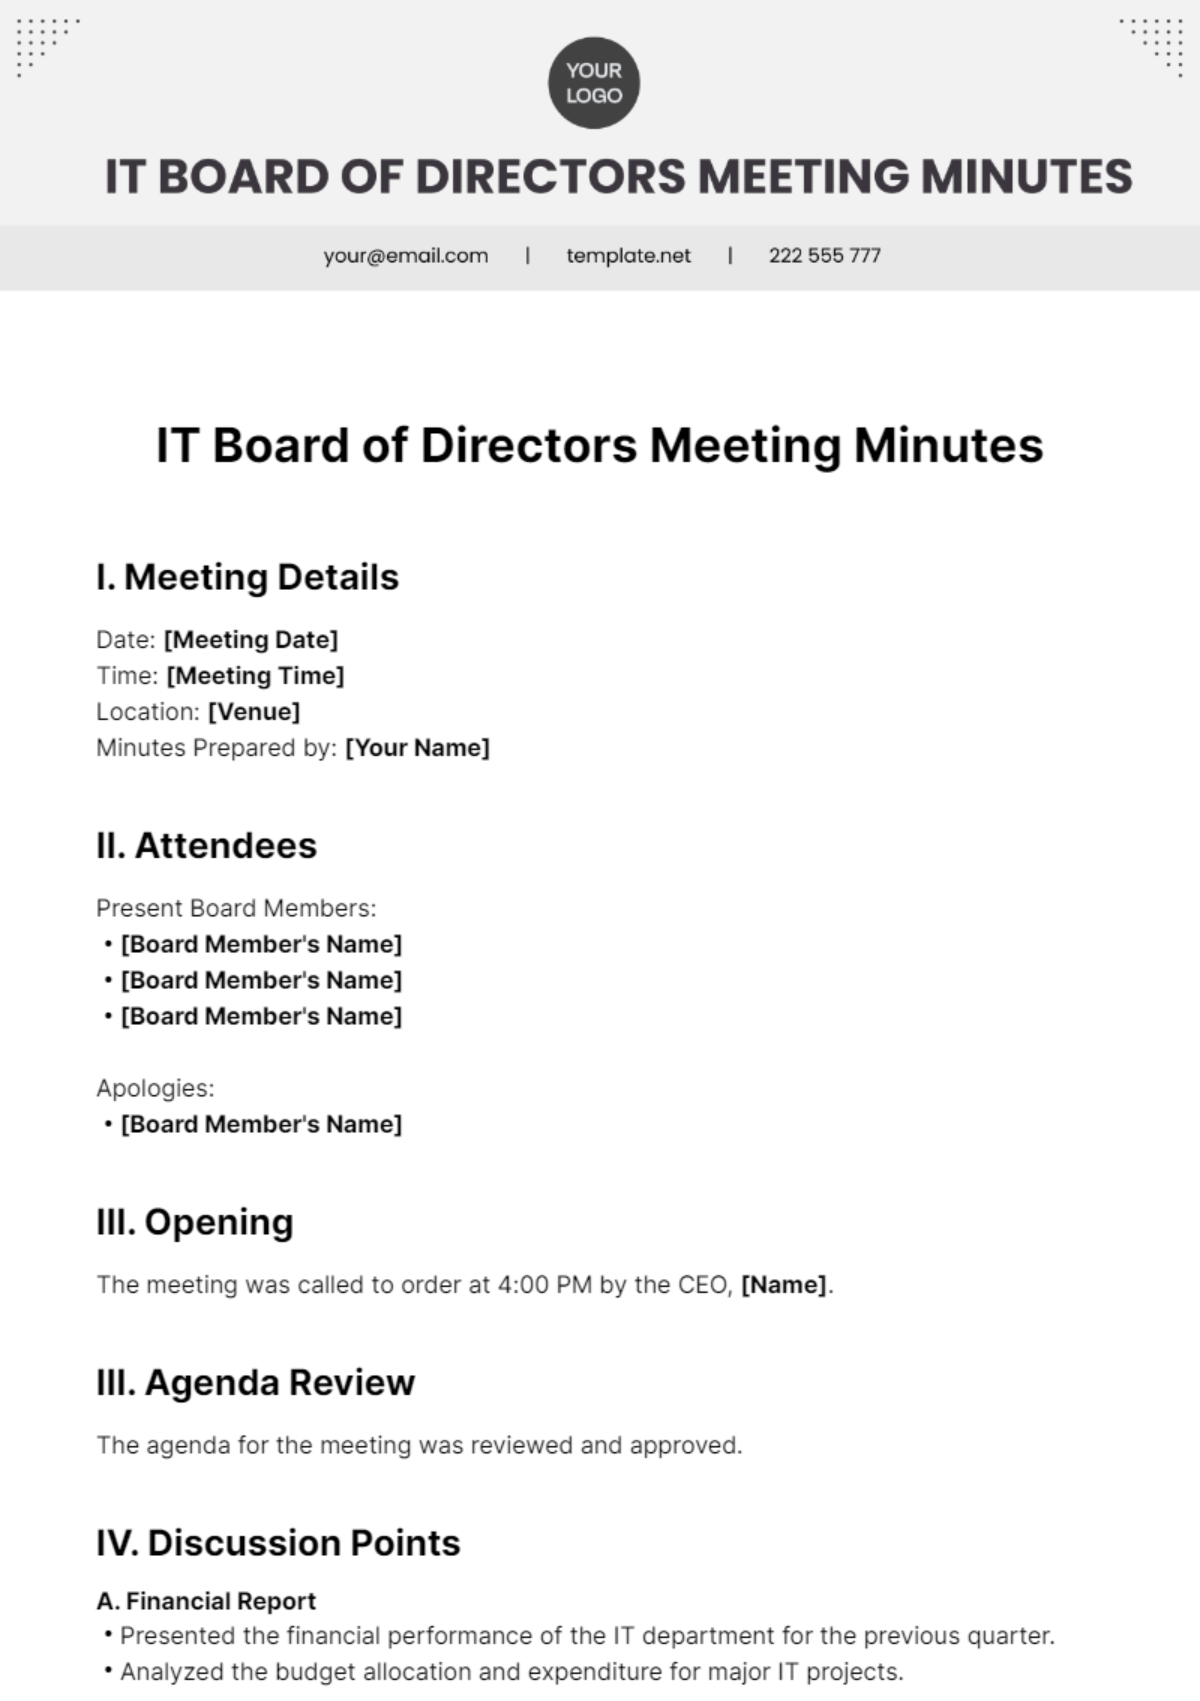 IT Board Of Directors Meeting Minutes Template